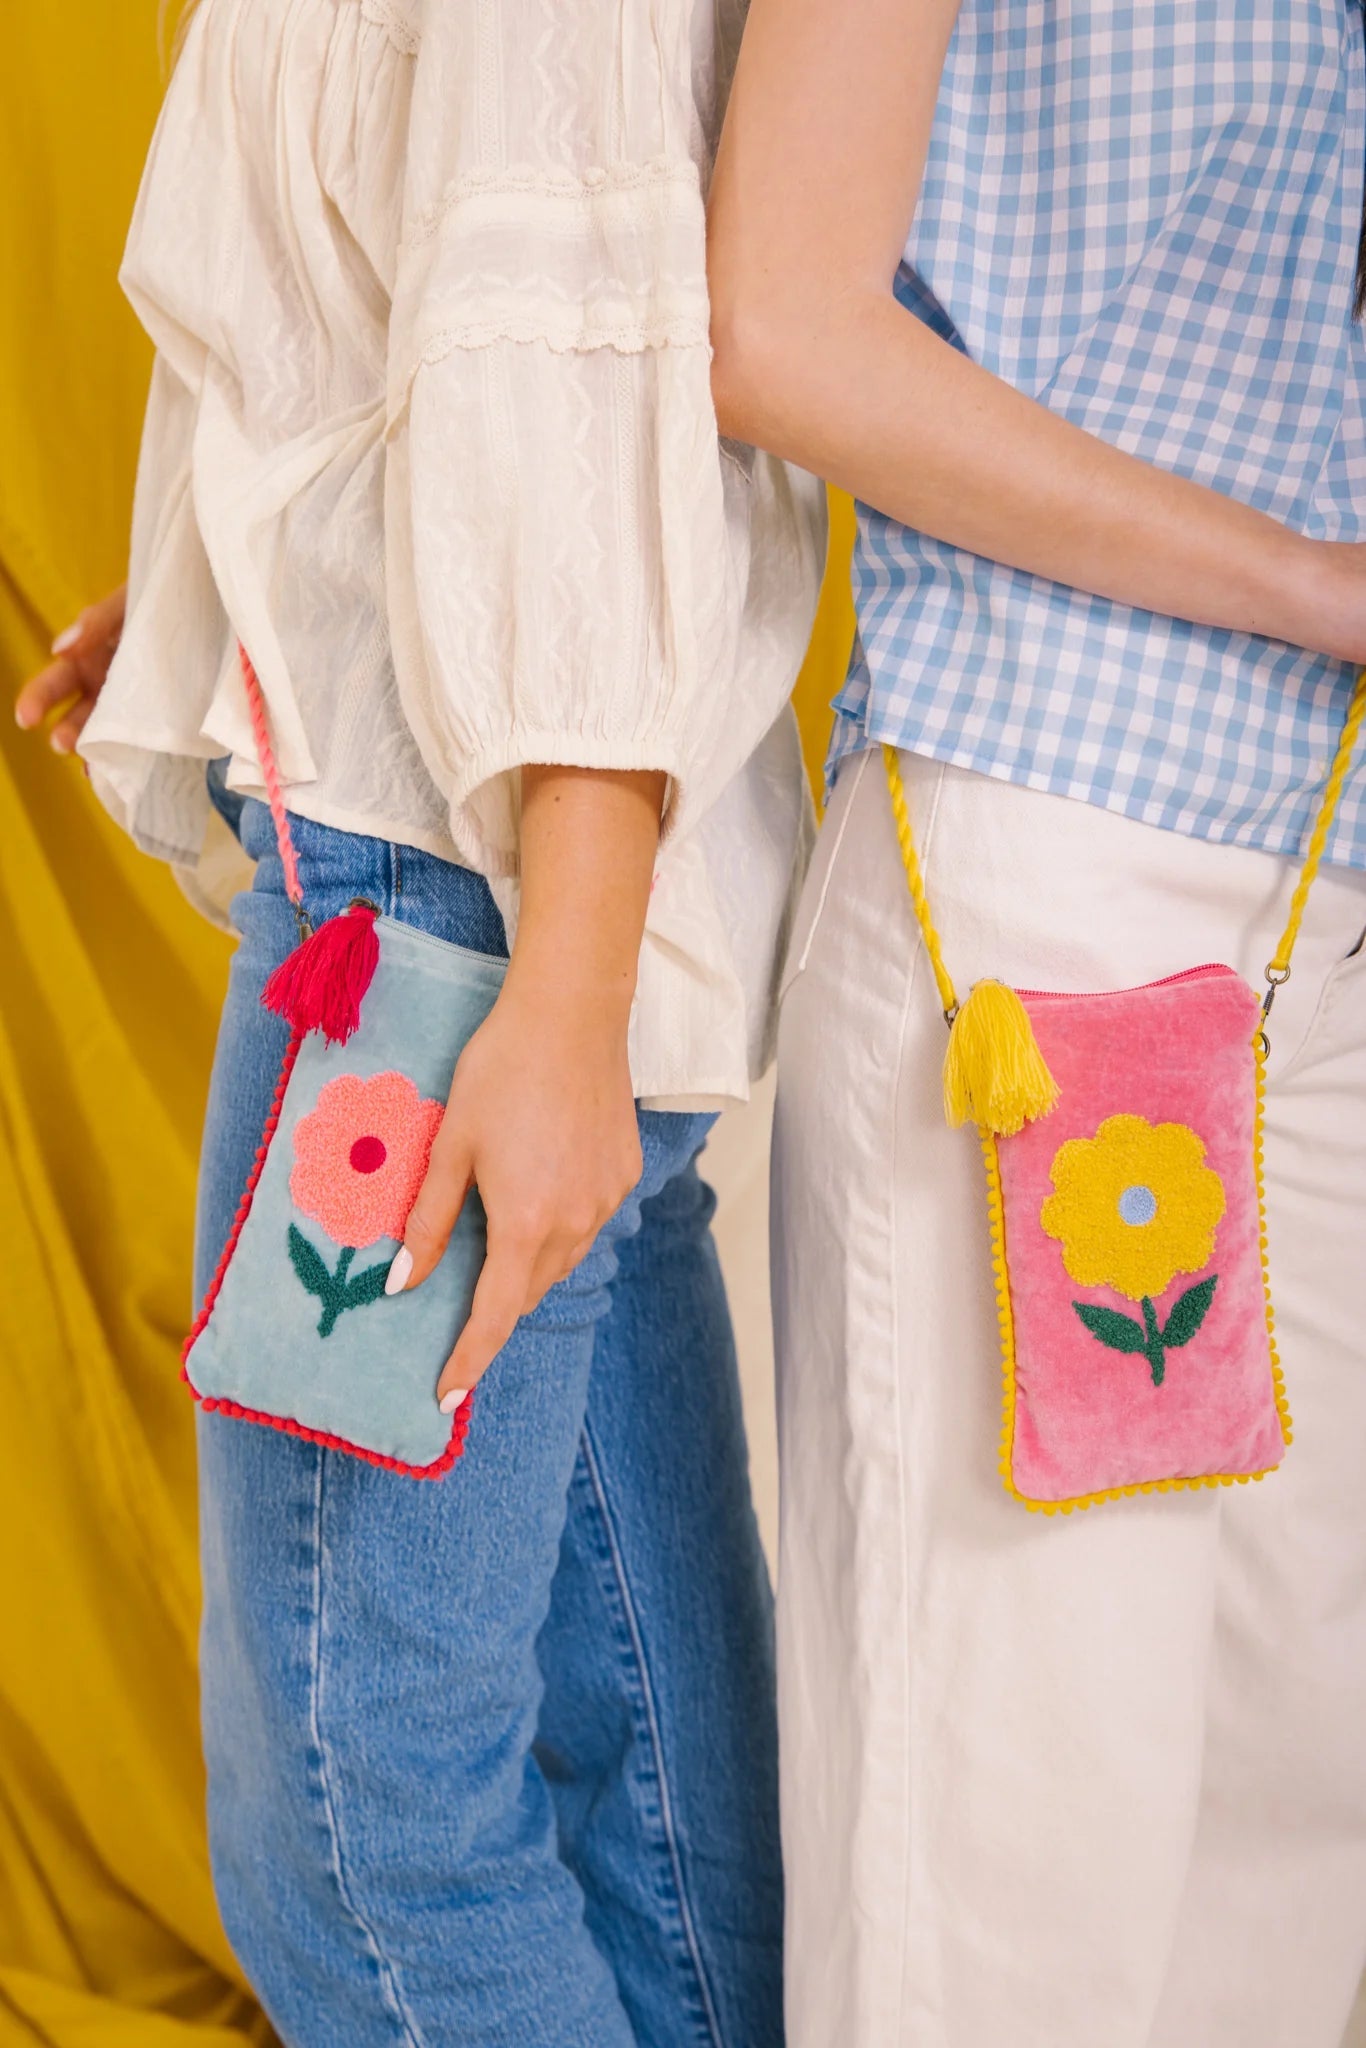 Phone Pouch | Flower | Pink Pouch Pink Lemons 